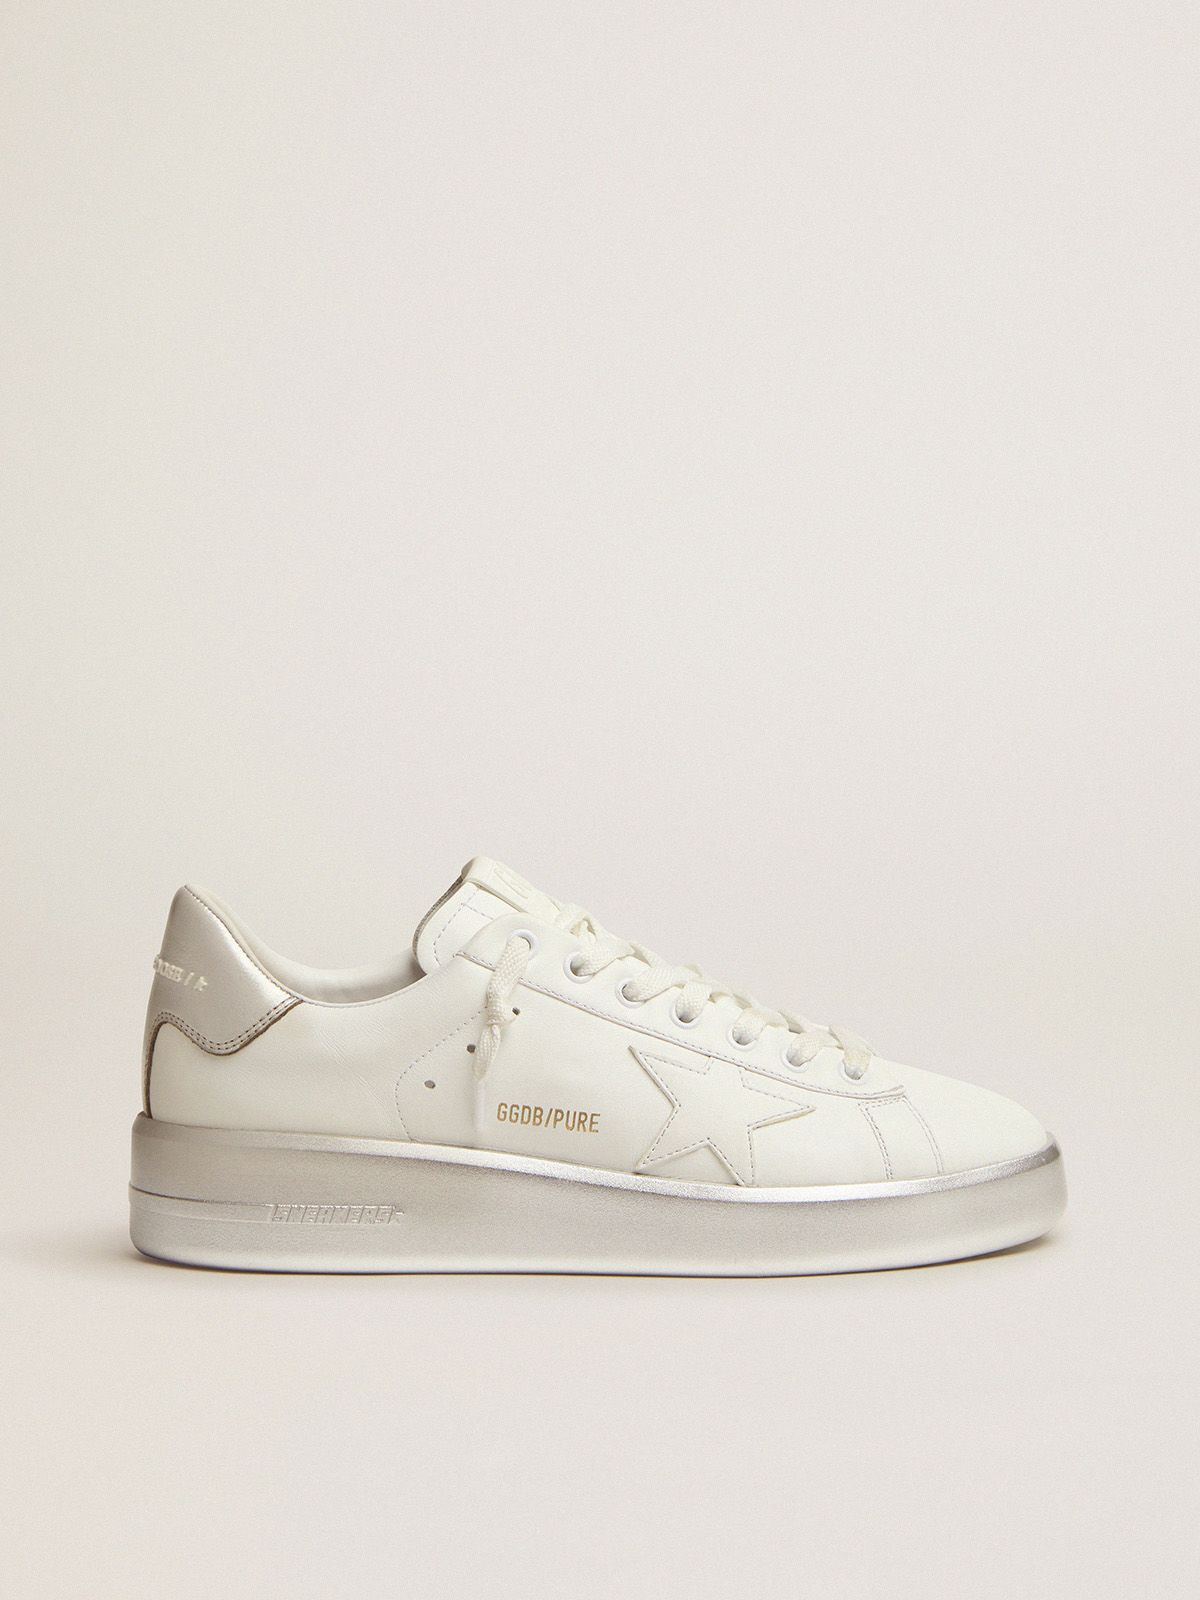 golden goose with heel white leather in tab Purestar silver laminated and sneakers foxing